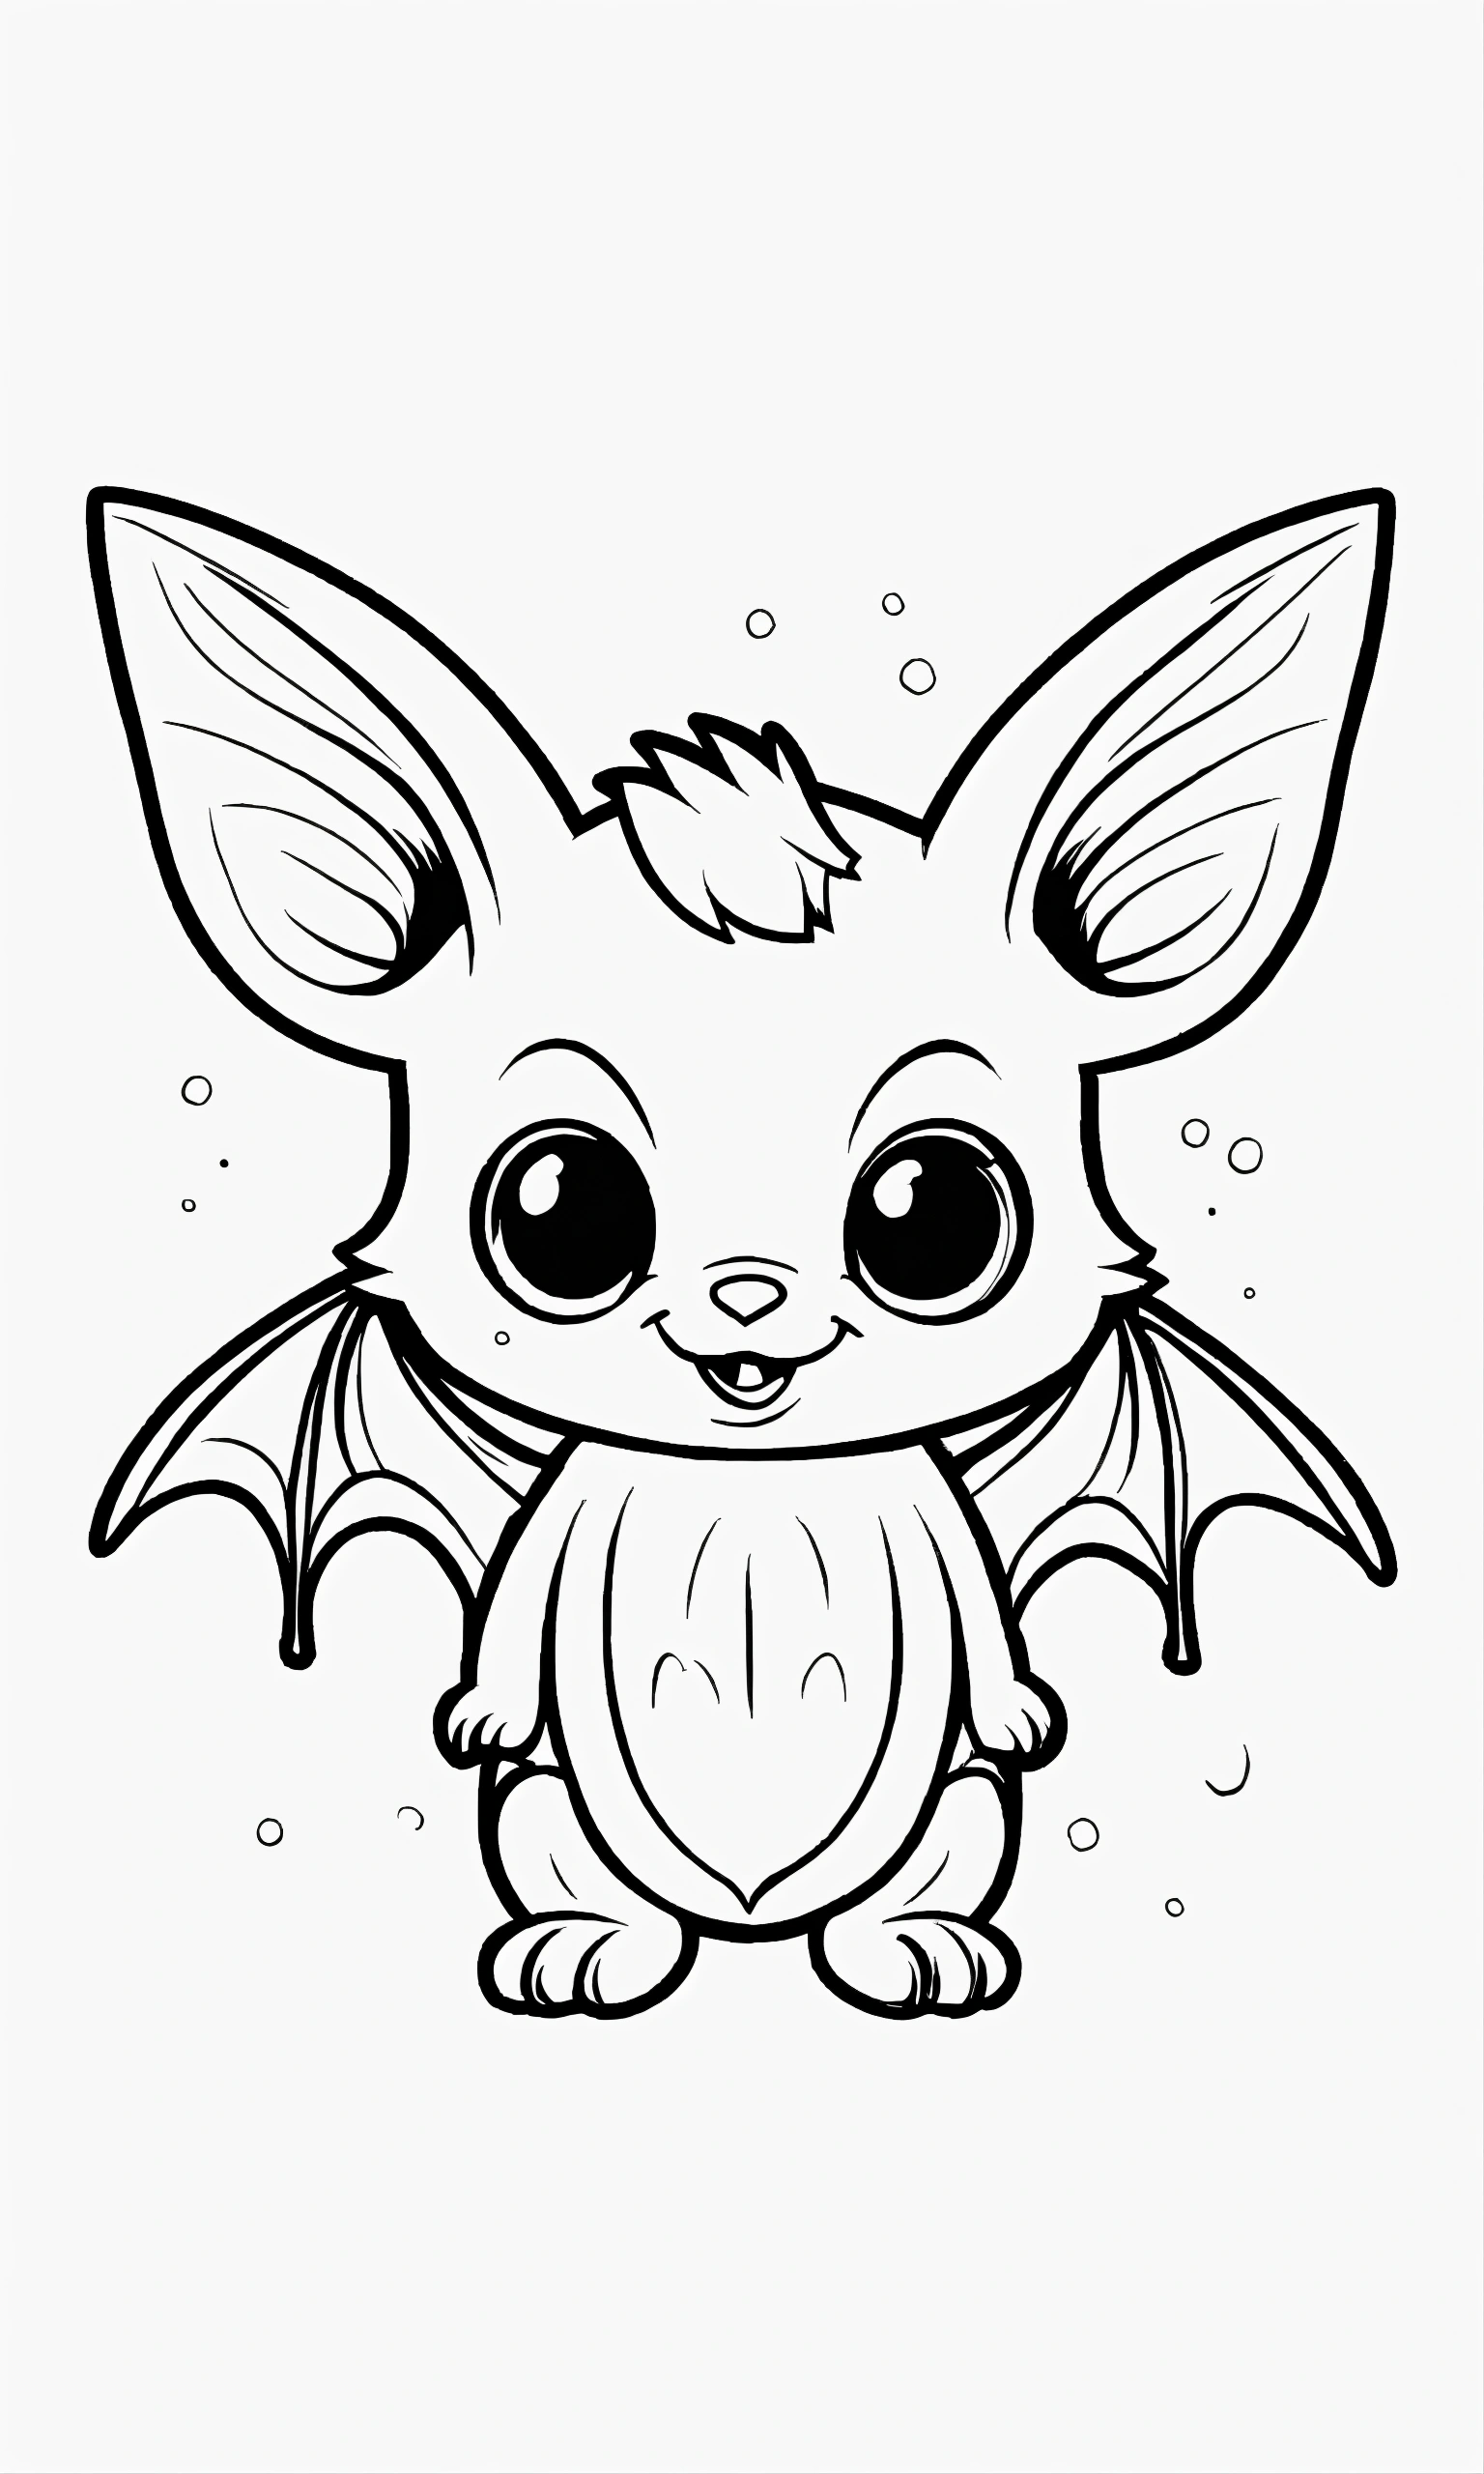 Lexica - Extremely simple. cartoon style. little cute bat. coloring ...